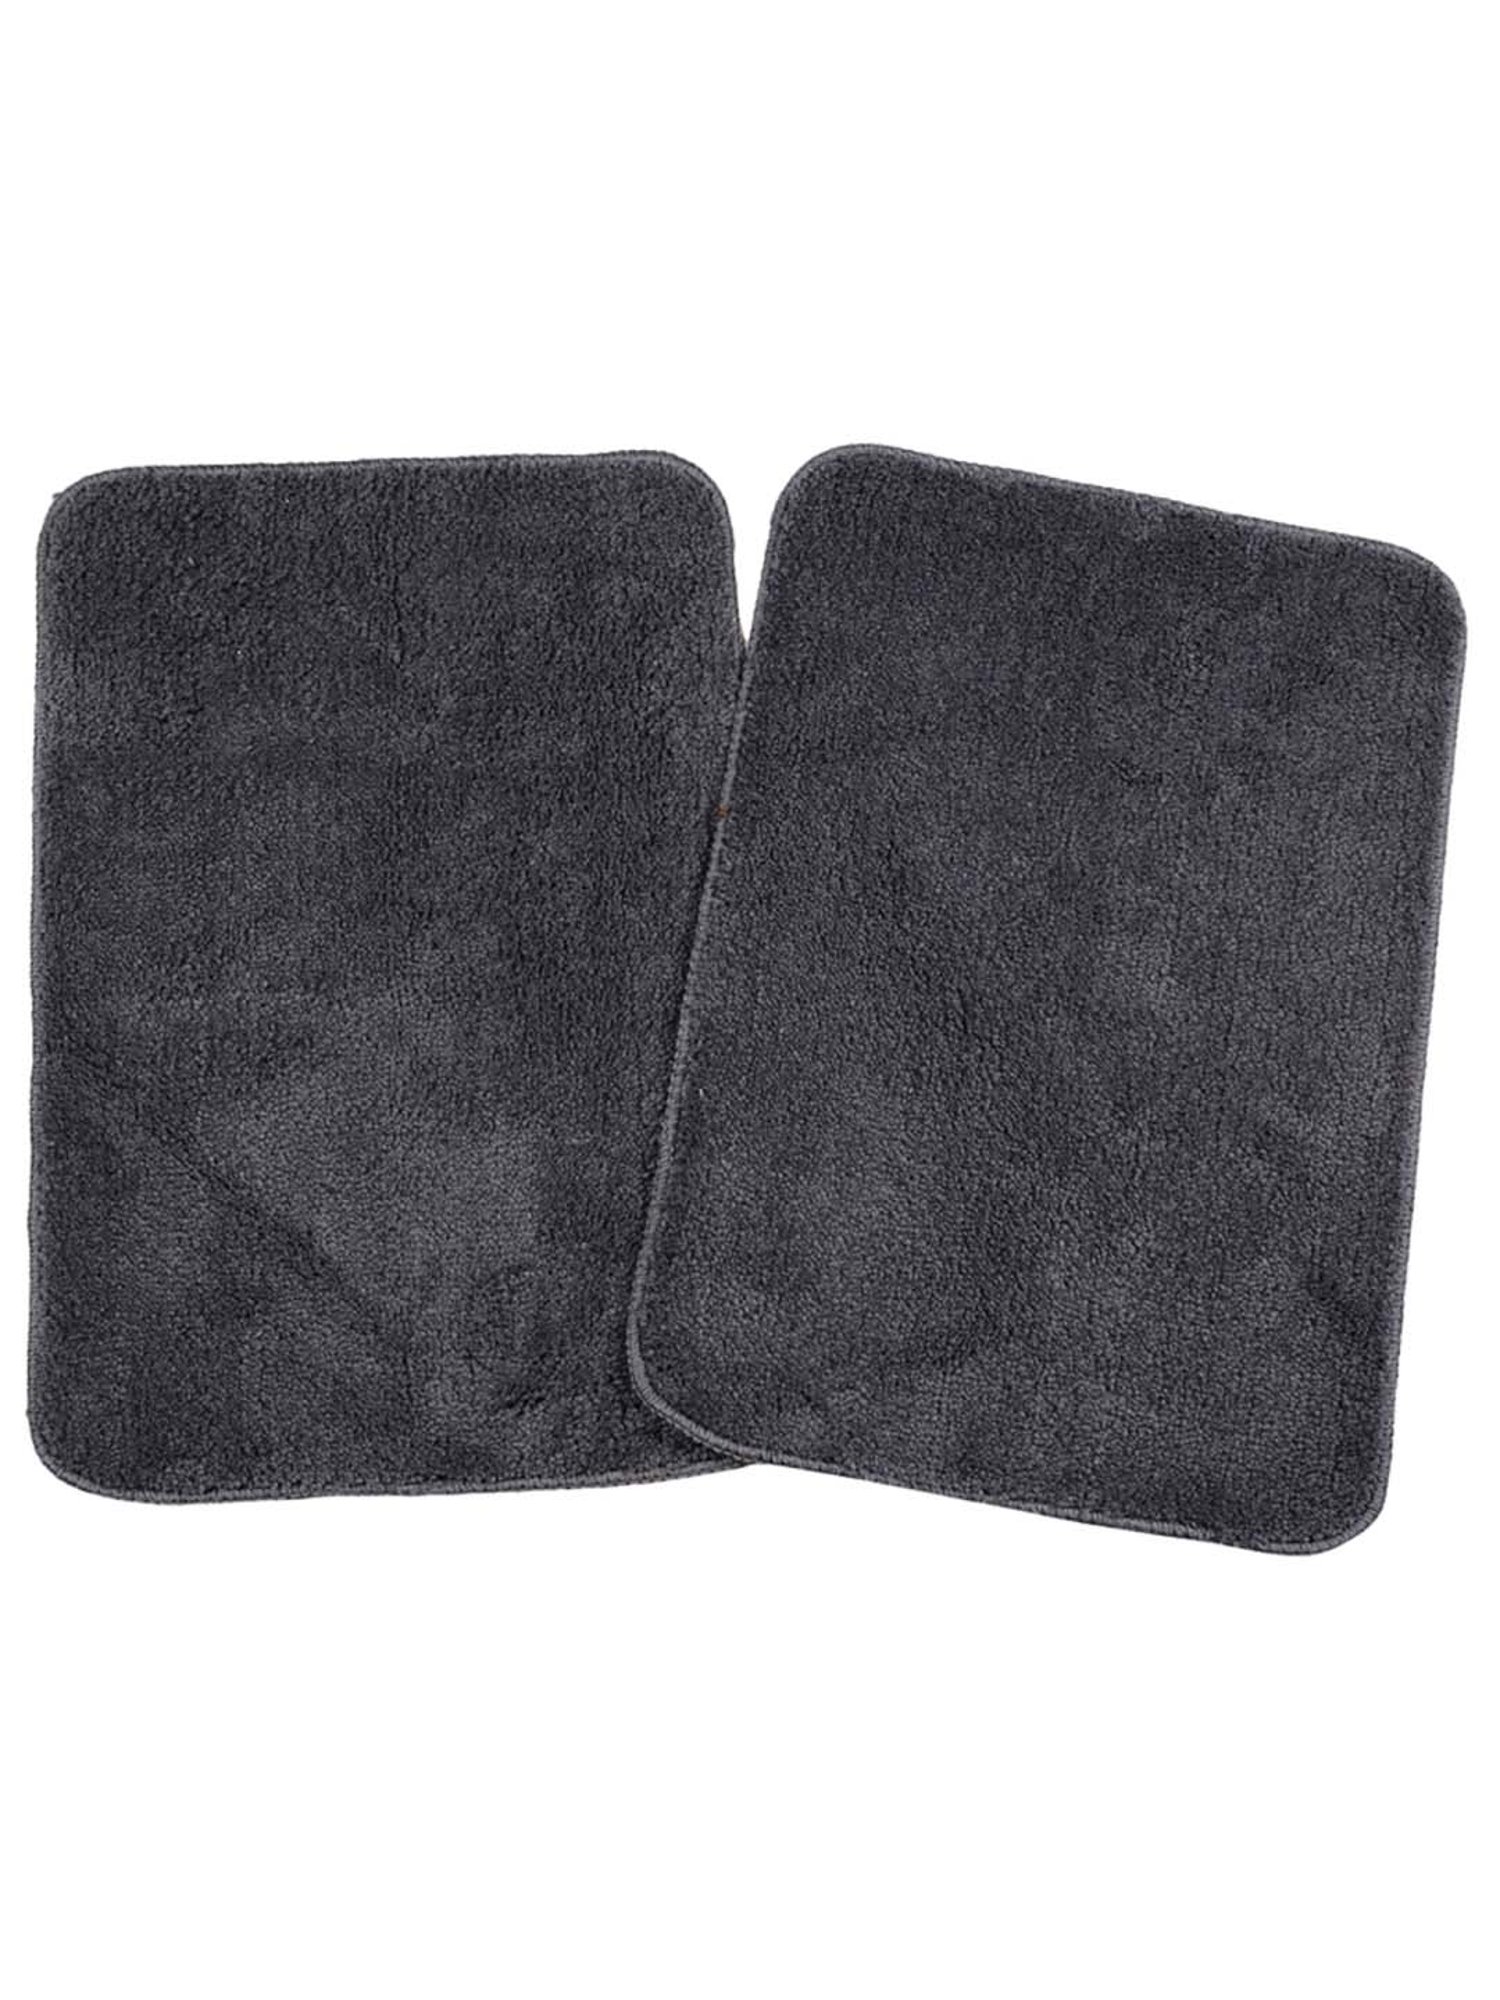 Buy Saral Home Multicolor Polyester 2571 GSM Bath Mats - Set of 2 at Best  Price @ Tata CLiQ